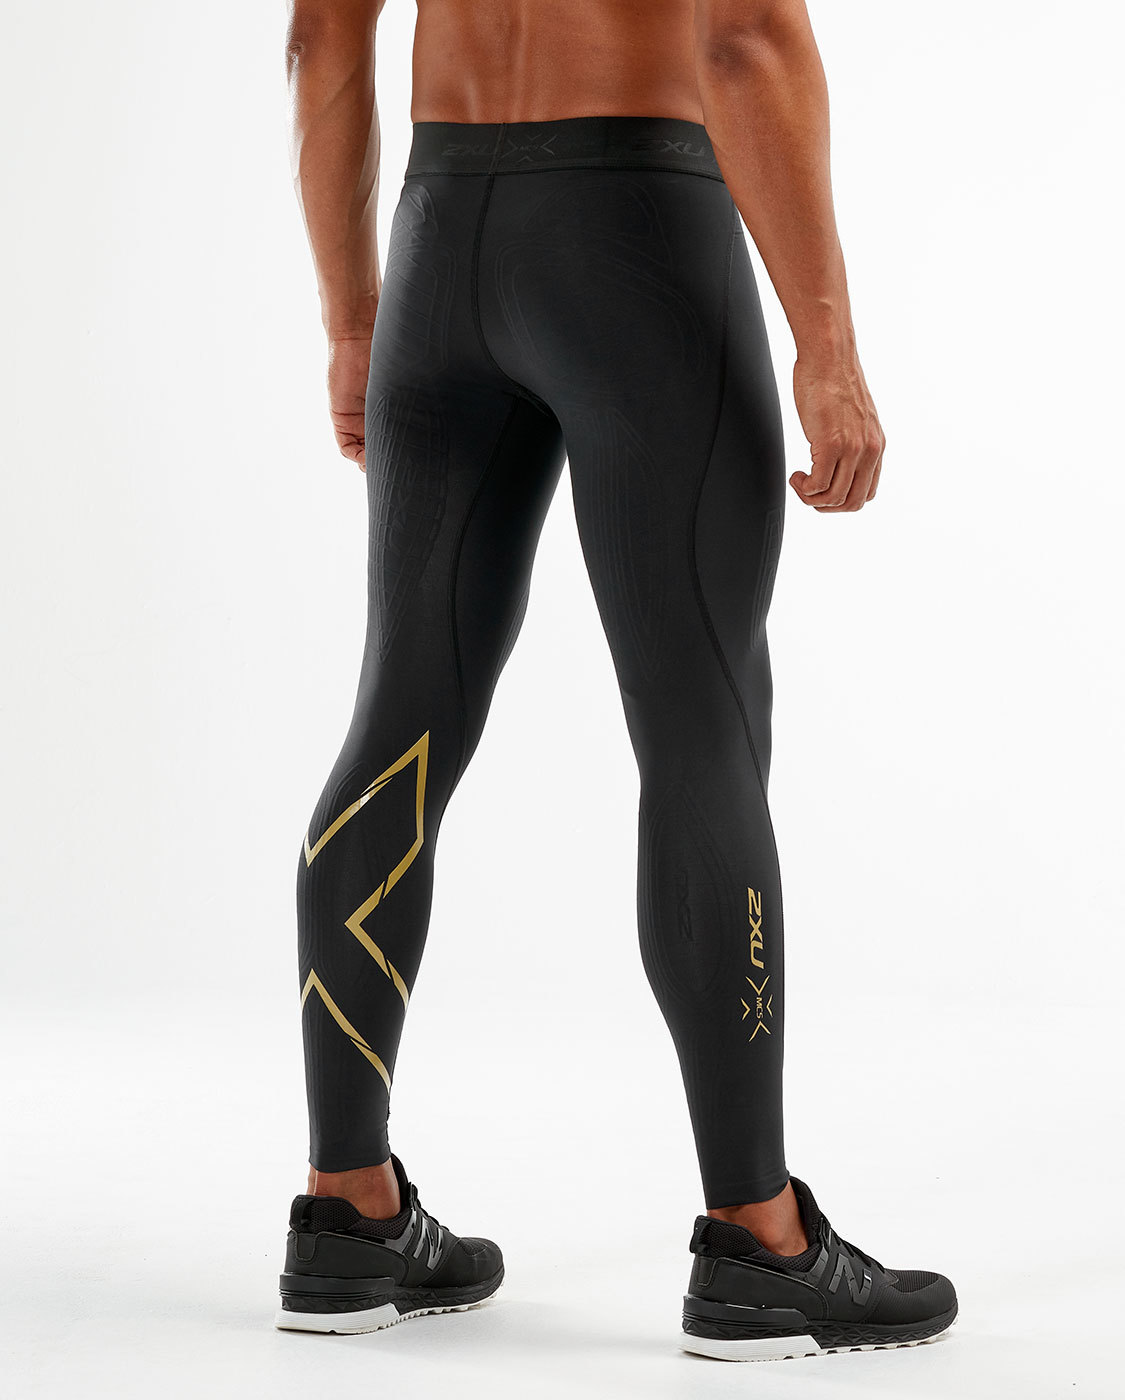 2XU Force Compression Tights Black/Gold - Fishface Cycles